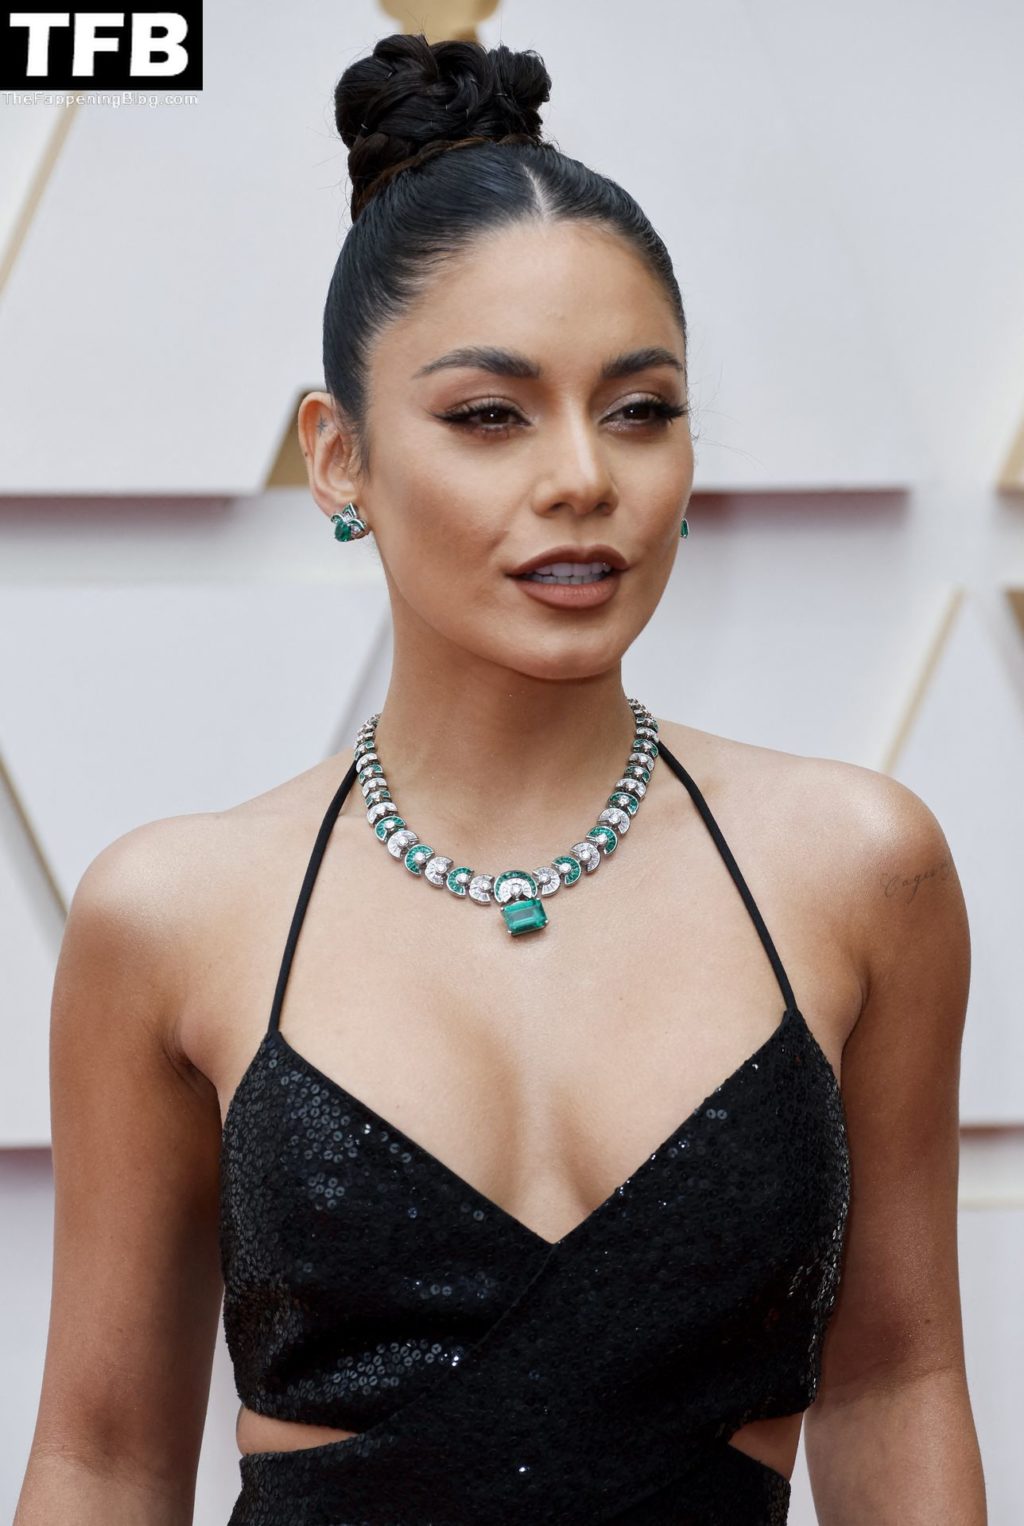 Vanessa Hudgens Sexy The Fappening Blog 5 4 1024x1526 - Vanessa Hudgens Poses on the Red Carpet at the 94th Annual Academy Awards (83 Photos)